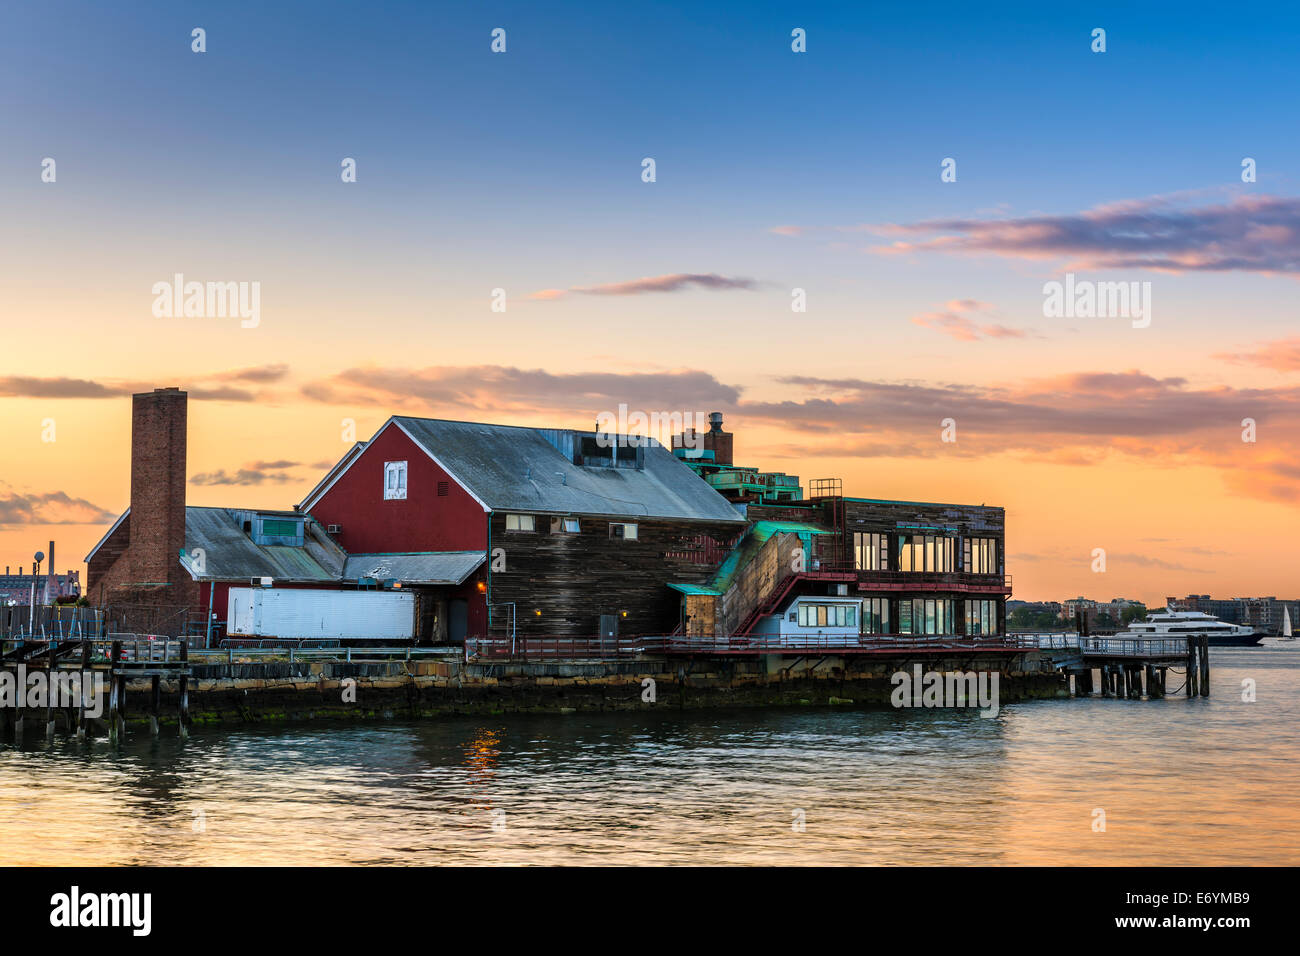 One of the buildings opposite the Harbor Walk at sunset along the Seaport District of Boston, Massachusetts - USA. Stock Photo